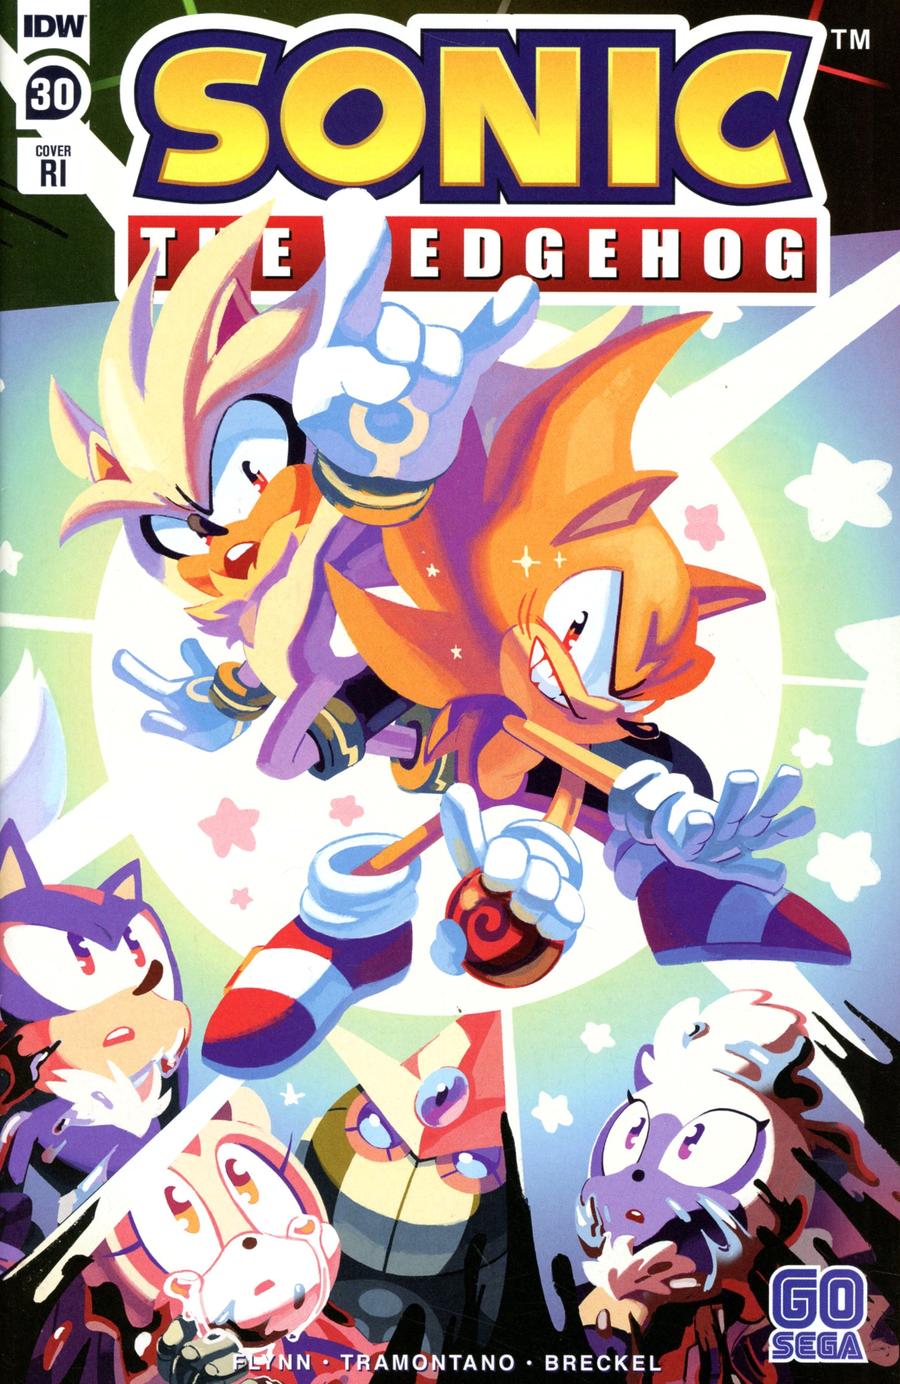 Sonic The Hedgehog Vol 3 #30 Cover C Incentive Nathalie Fourdraine Variant Cover